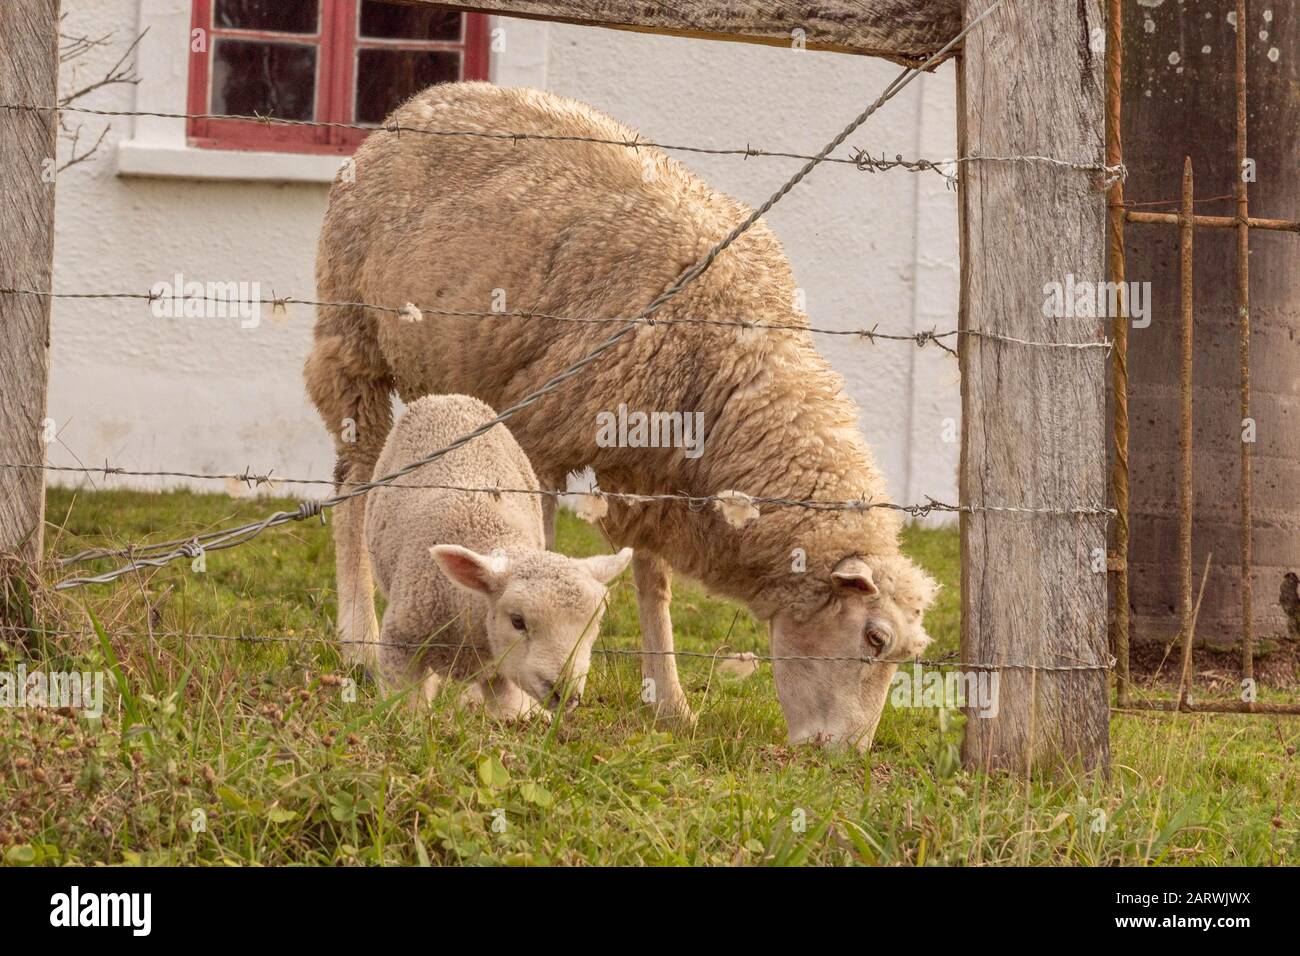 A little sheep feeding after the barbed wire fence accompanied by its mother sheep. Farm animals on small rural property in Brazil. Stock Photo